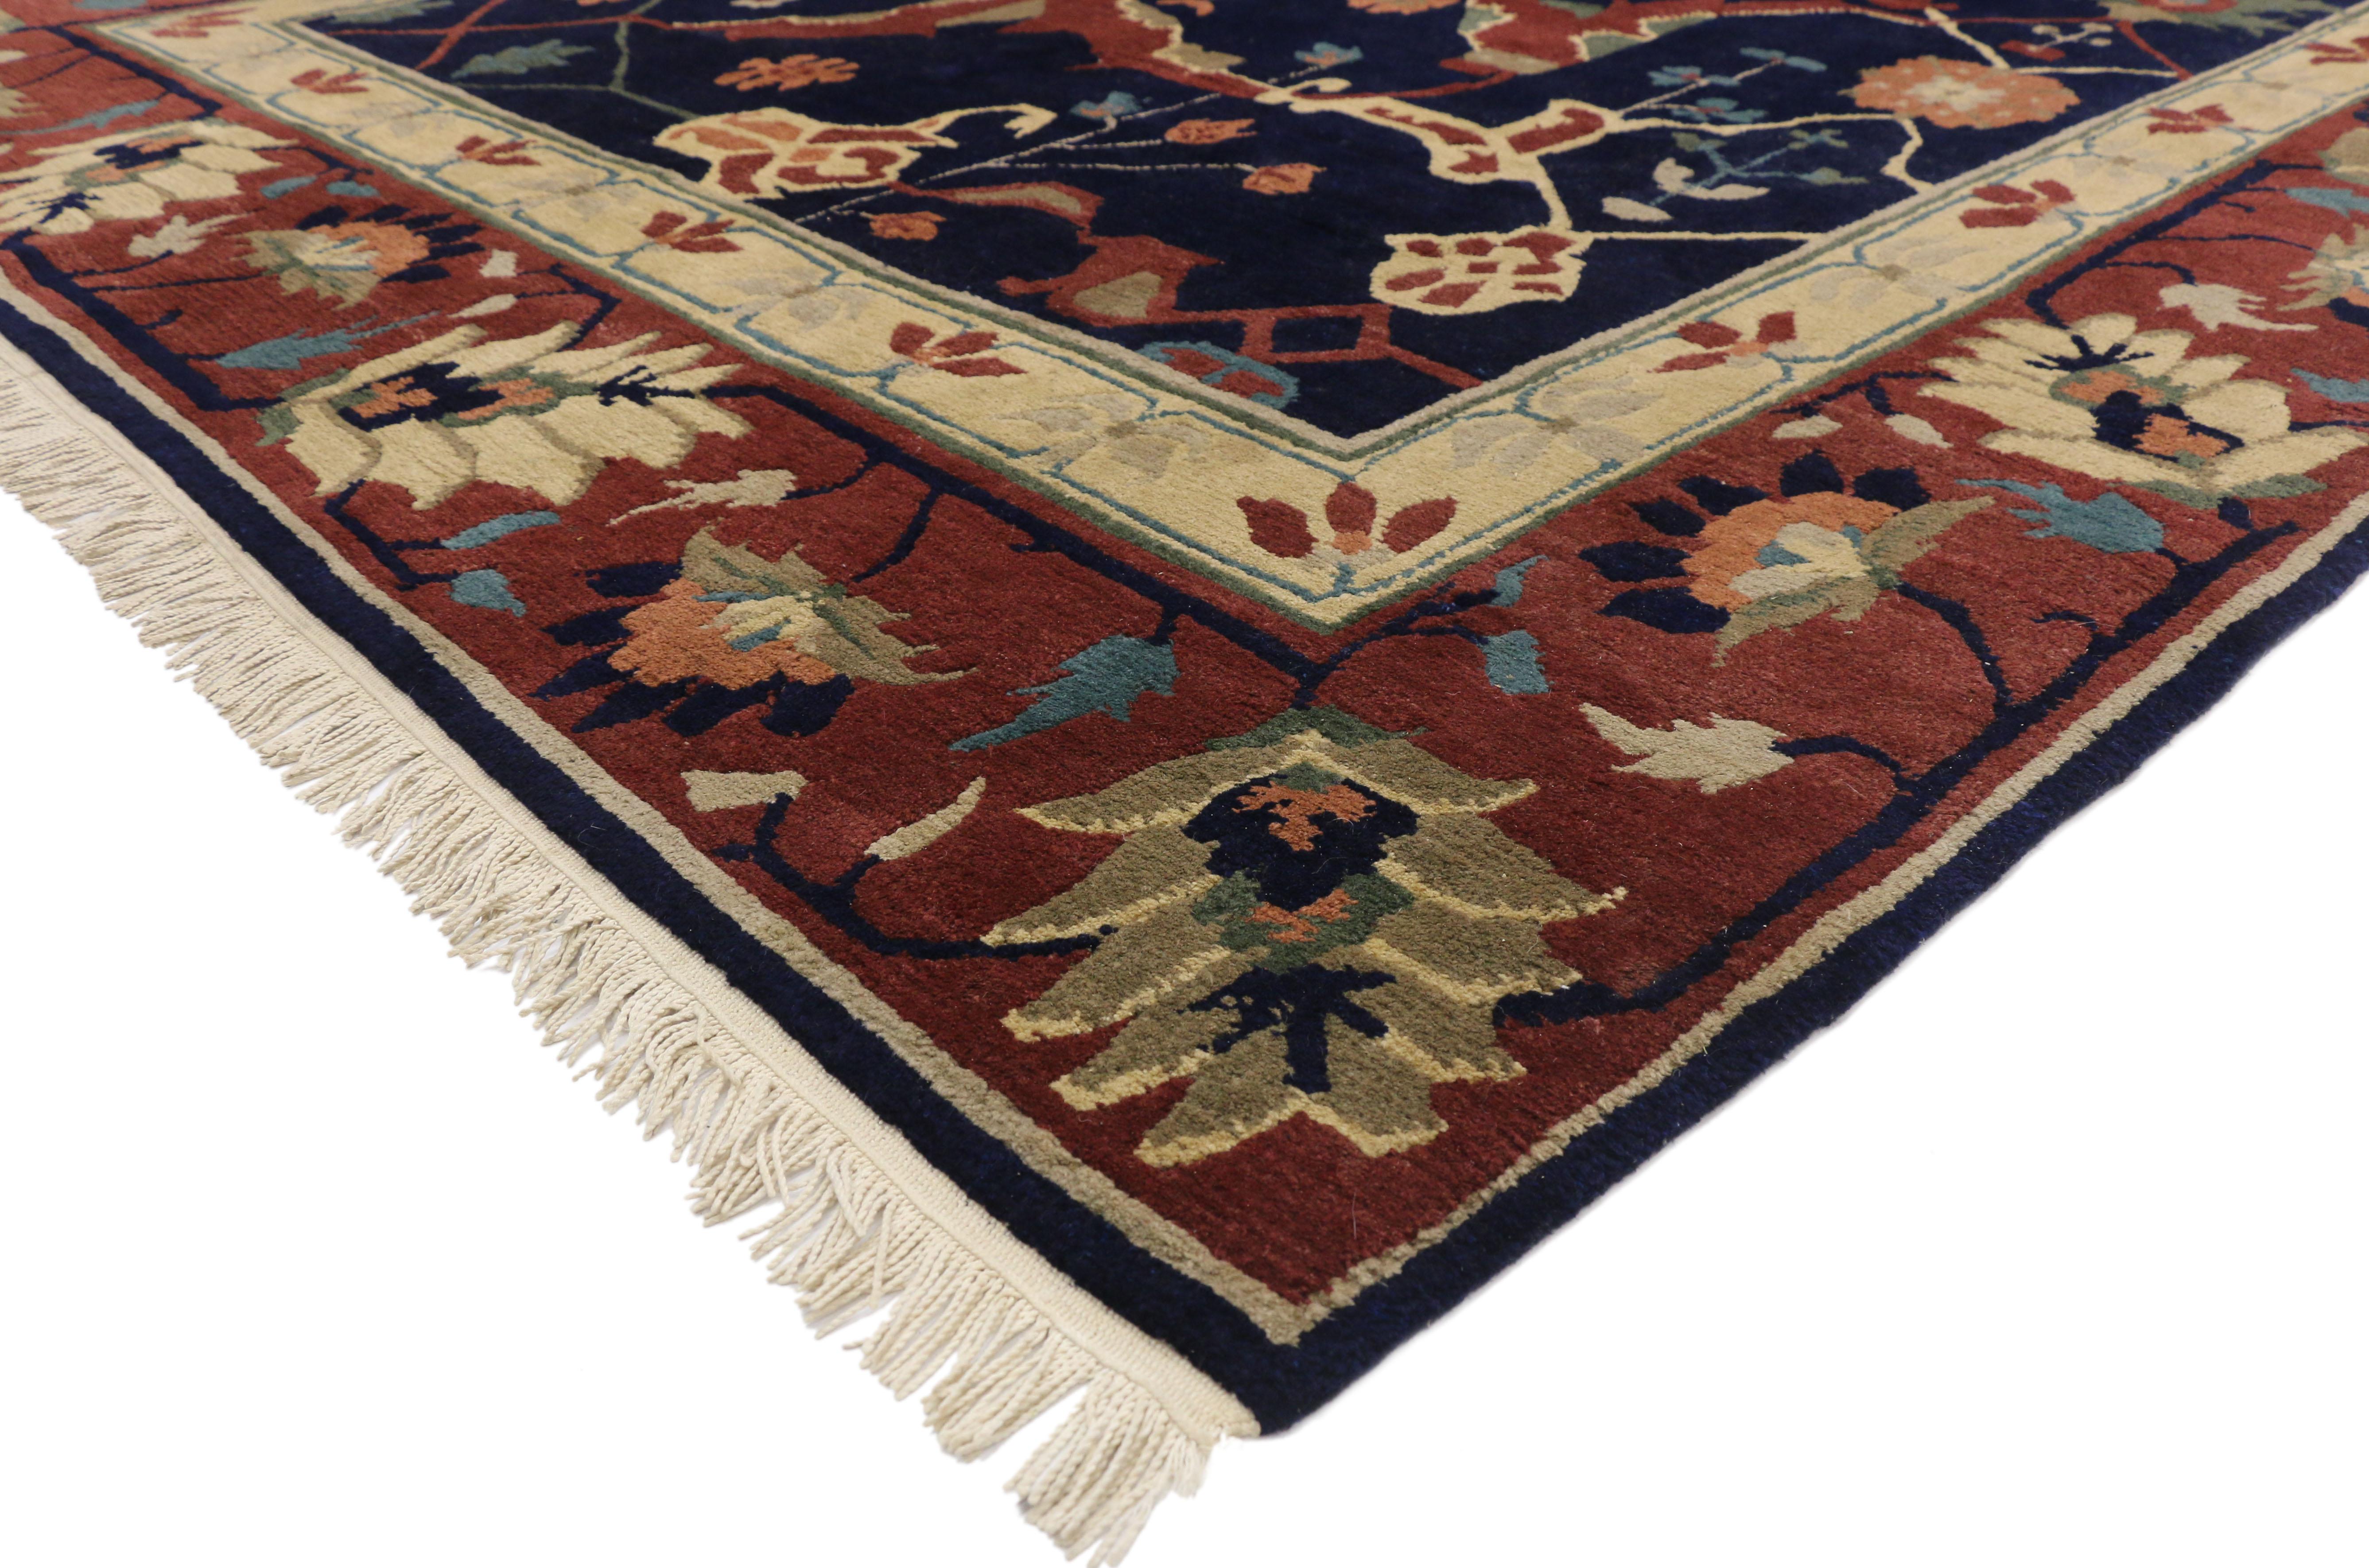 77262 Vintage Tibetan Area rug with Persian Serapi design. This hand knotted wool vintage Tibetan area rug beautifully displays a Persian Serapi all over design on an ink blue backdrop. The all over design are harder to come by than those with the